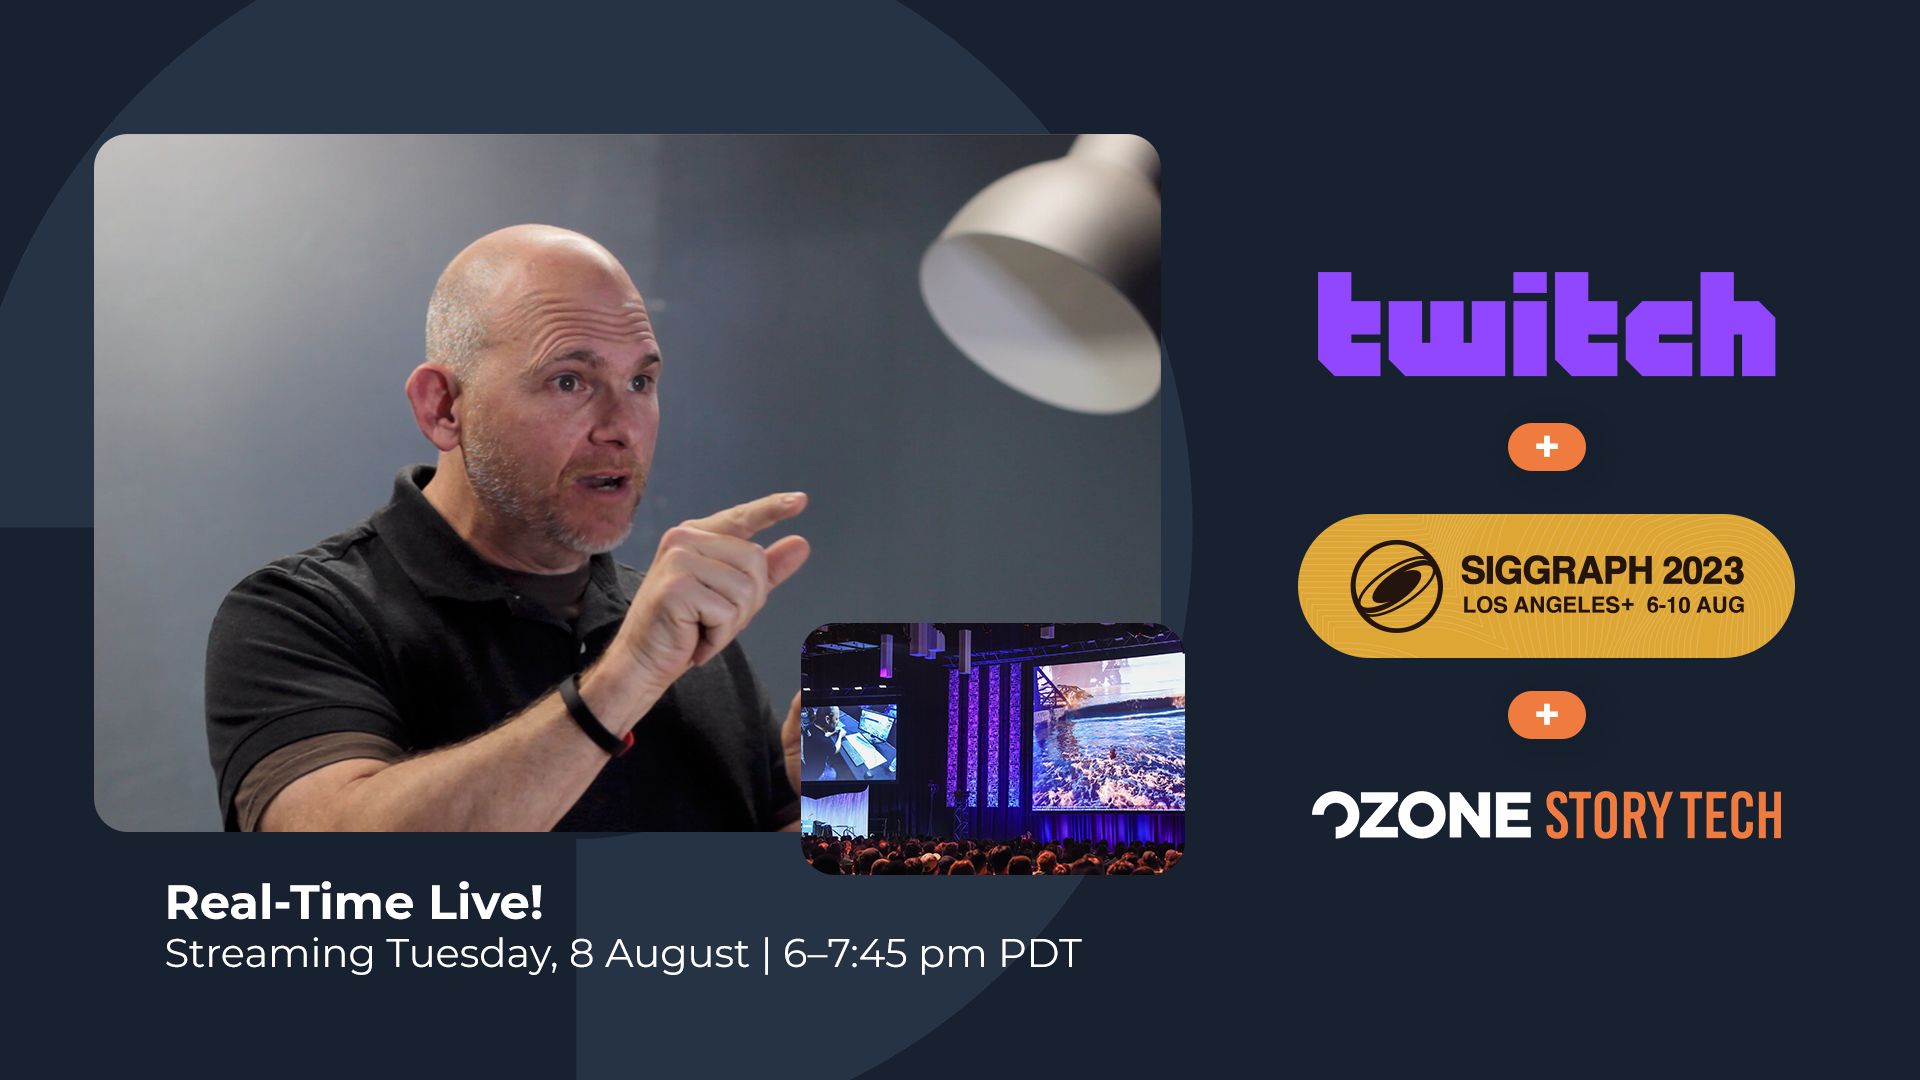 Link to Siggraph 2023 Live Stream on Twitch